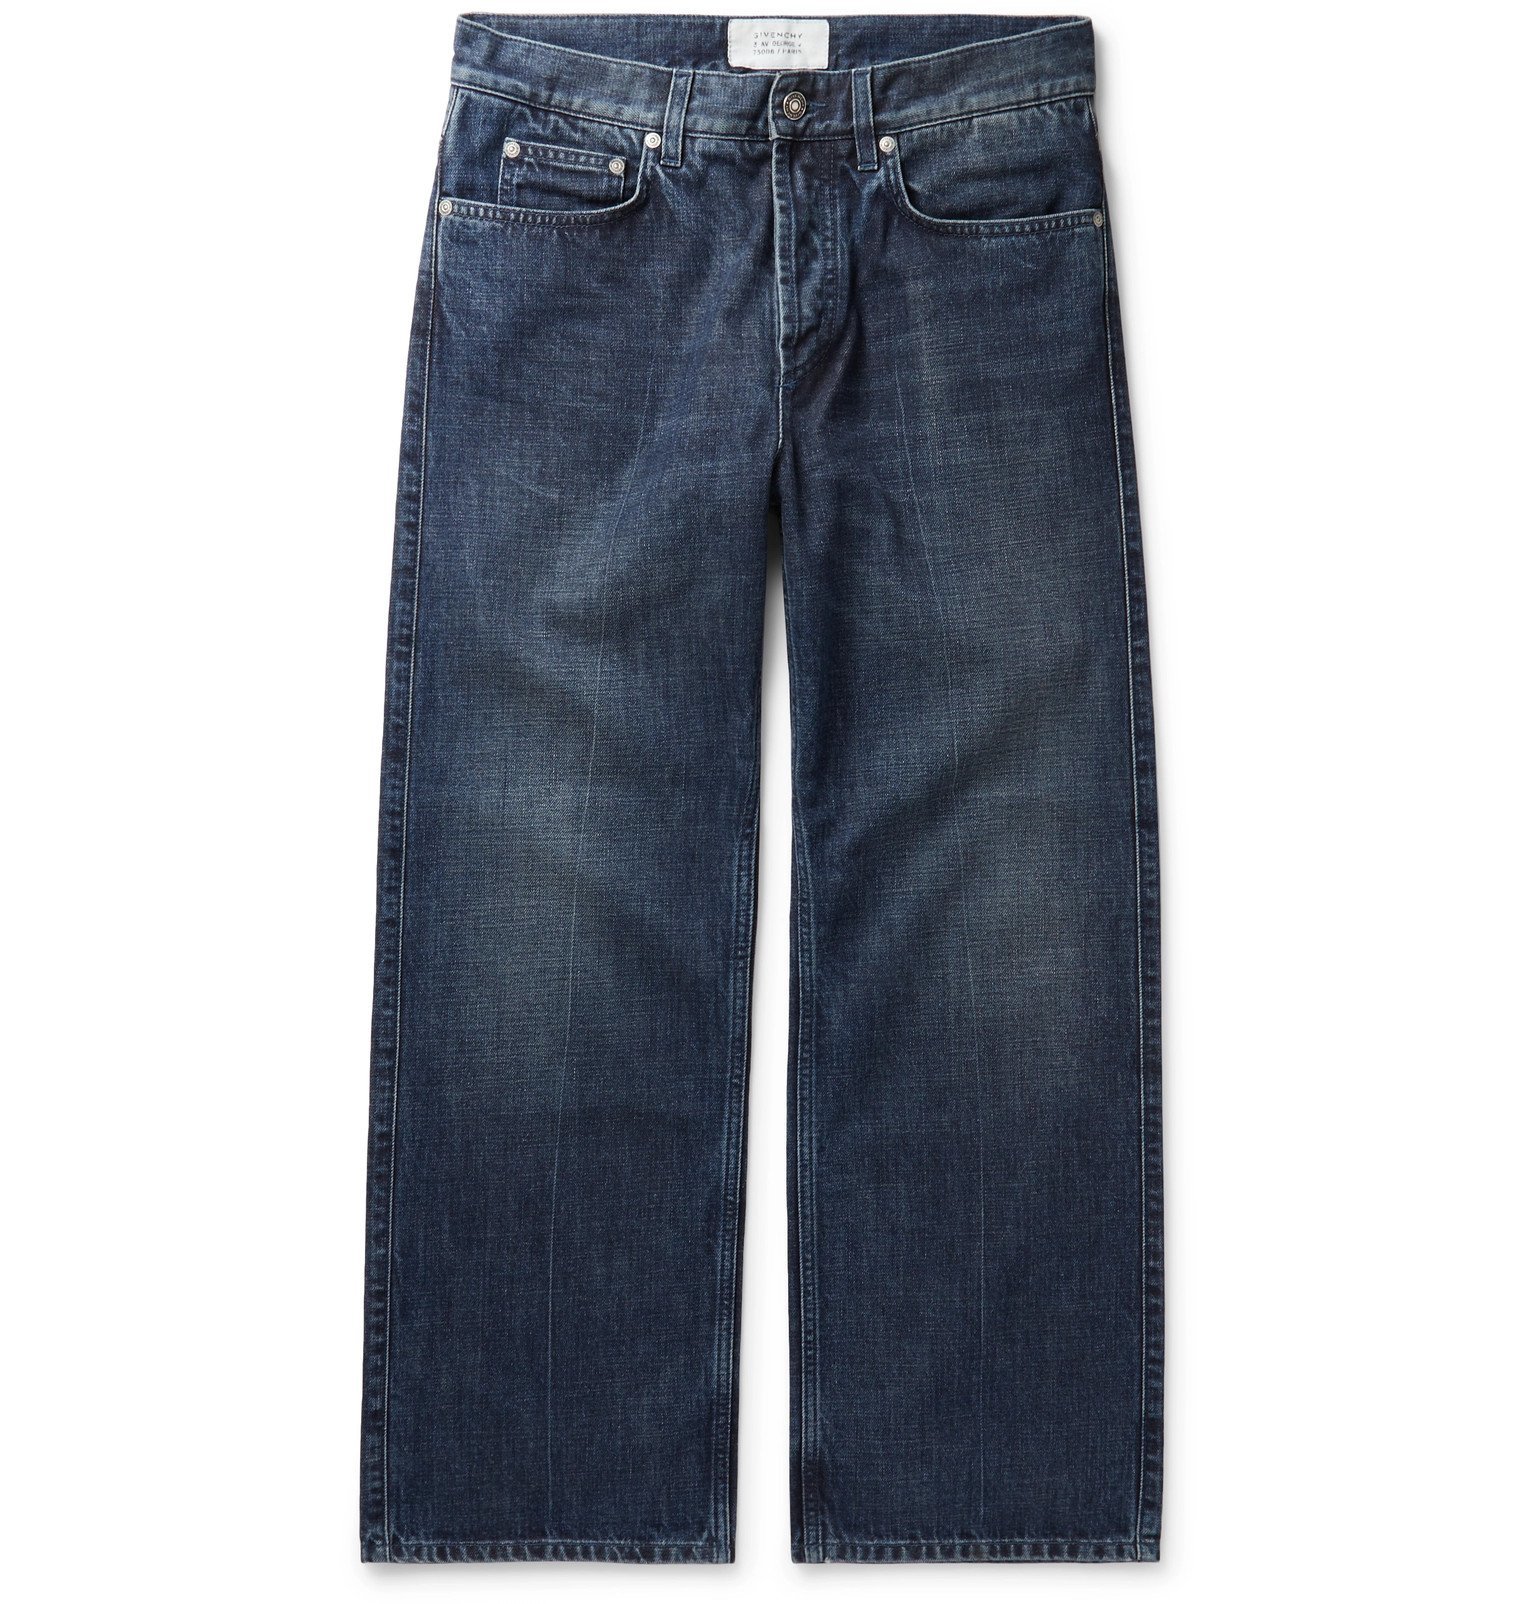 Givenchy - Denim Jeans - Blue Givenchy